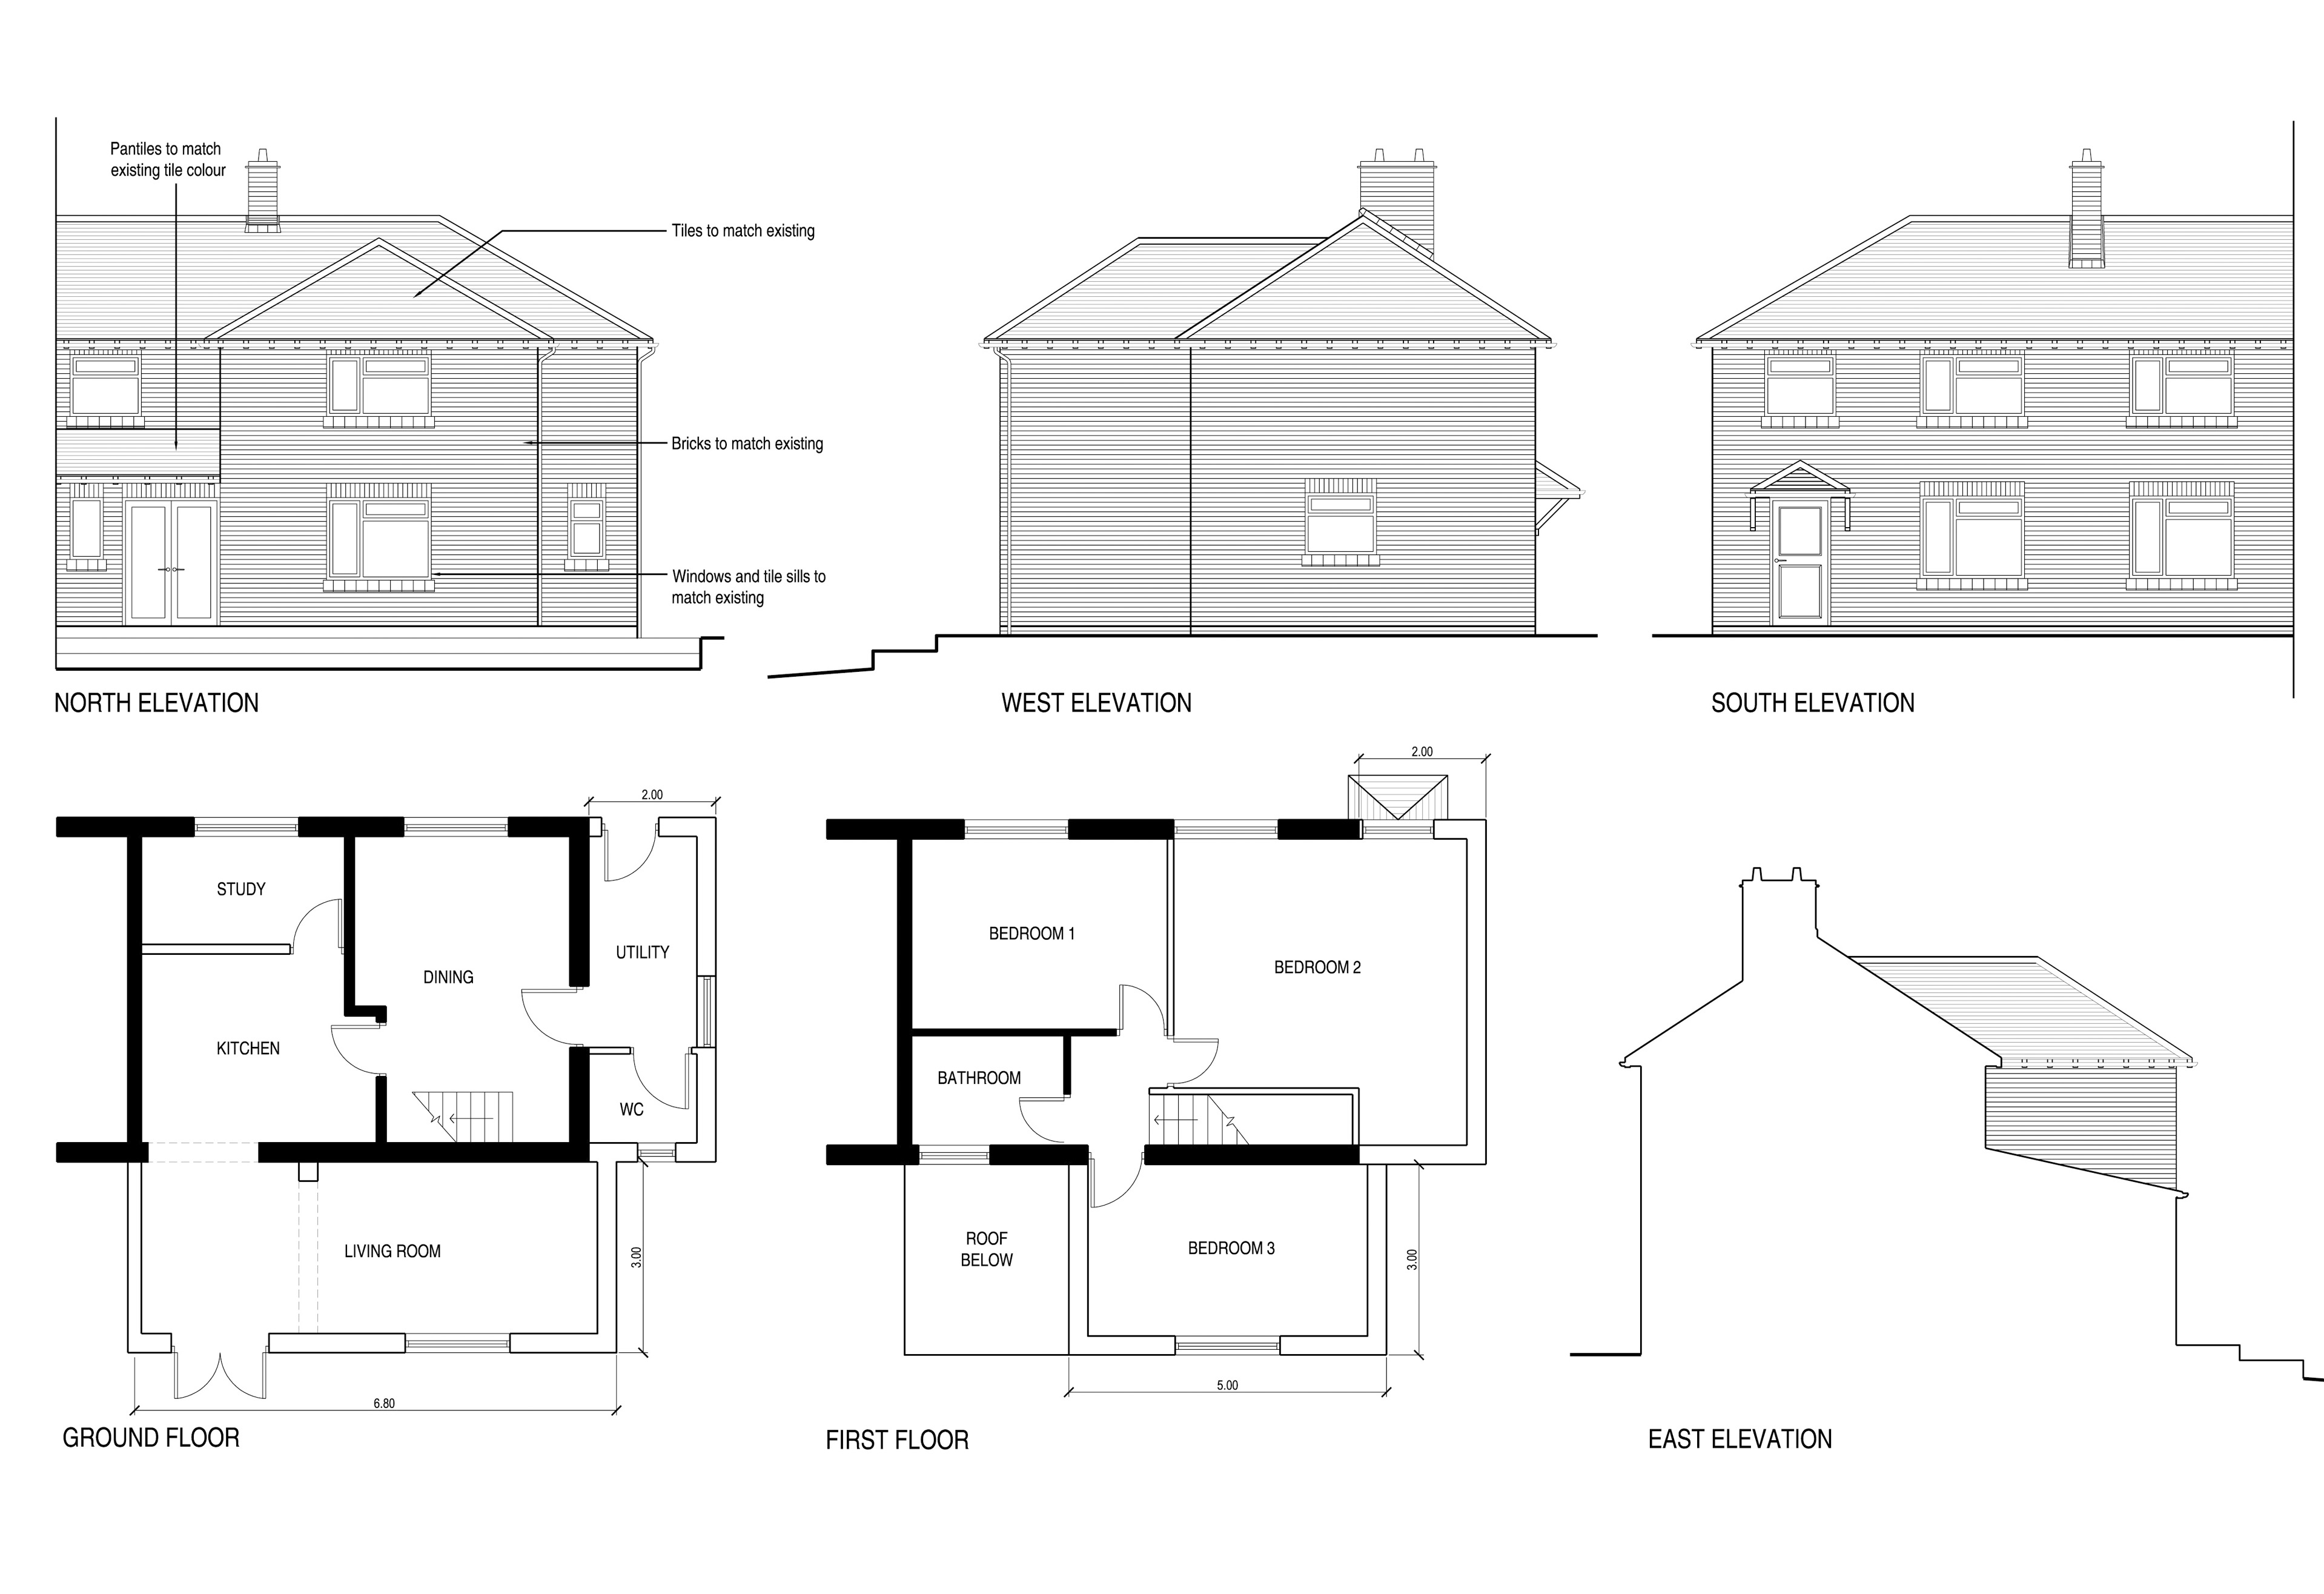 D:BOWERS_COTTAGEBowers_Cottage_Drawings proposed elevs (1)